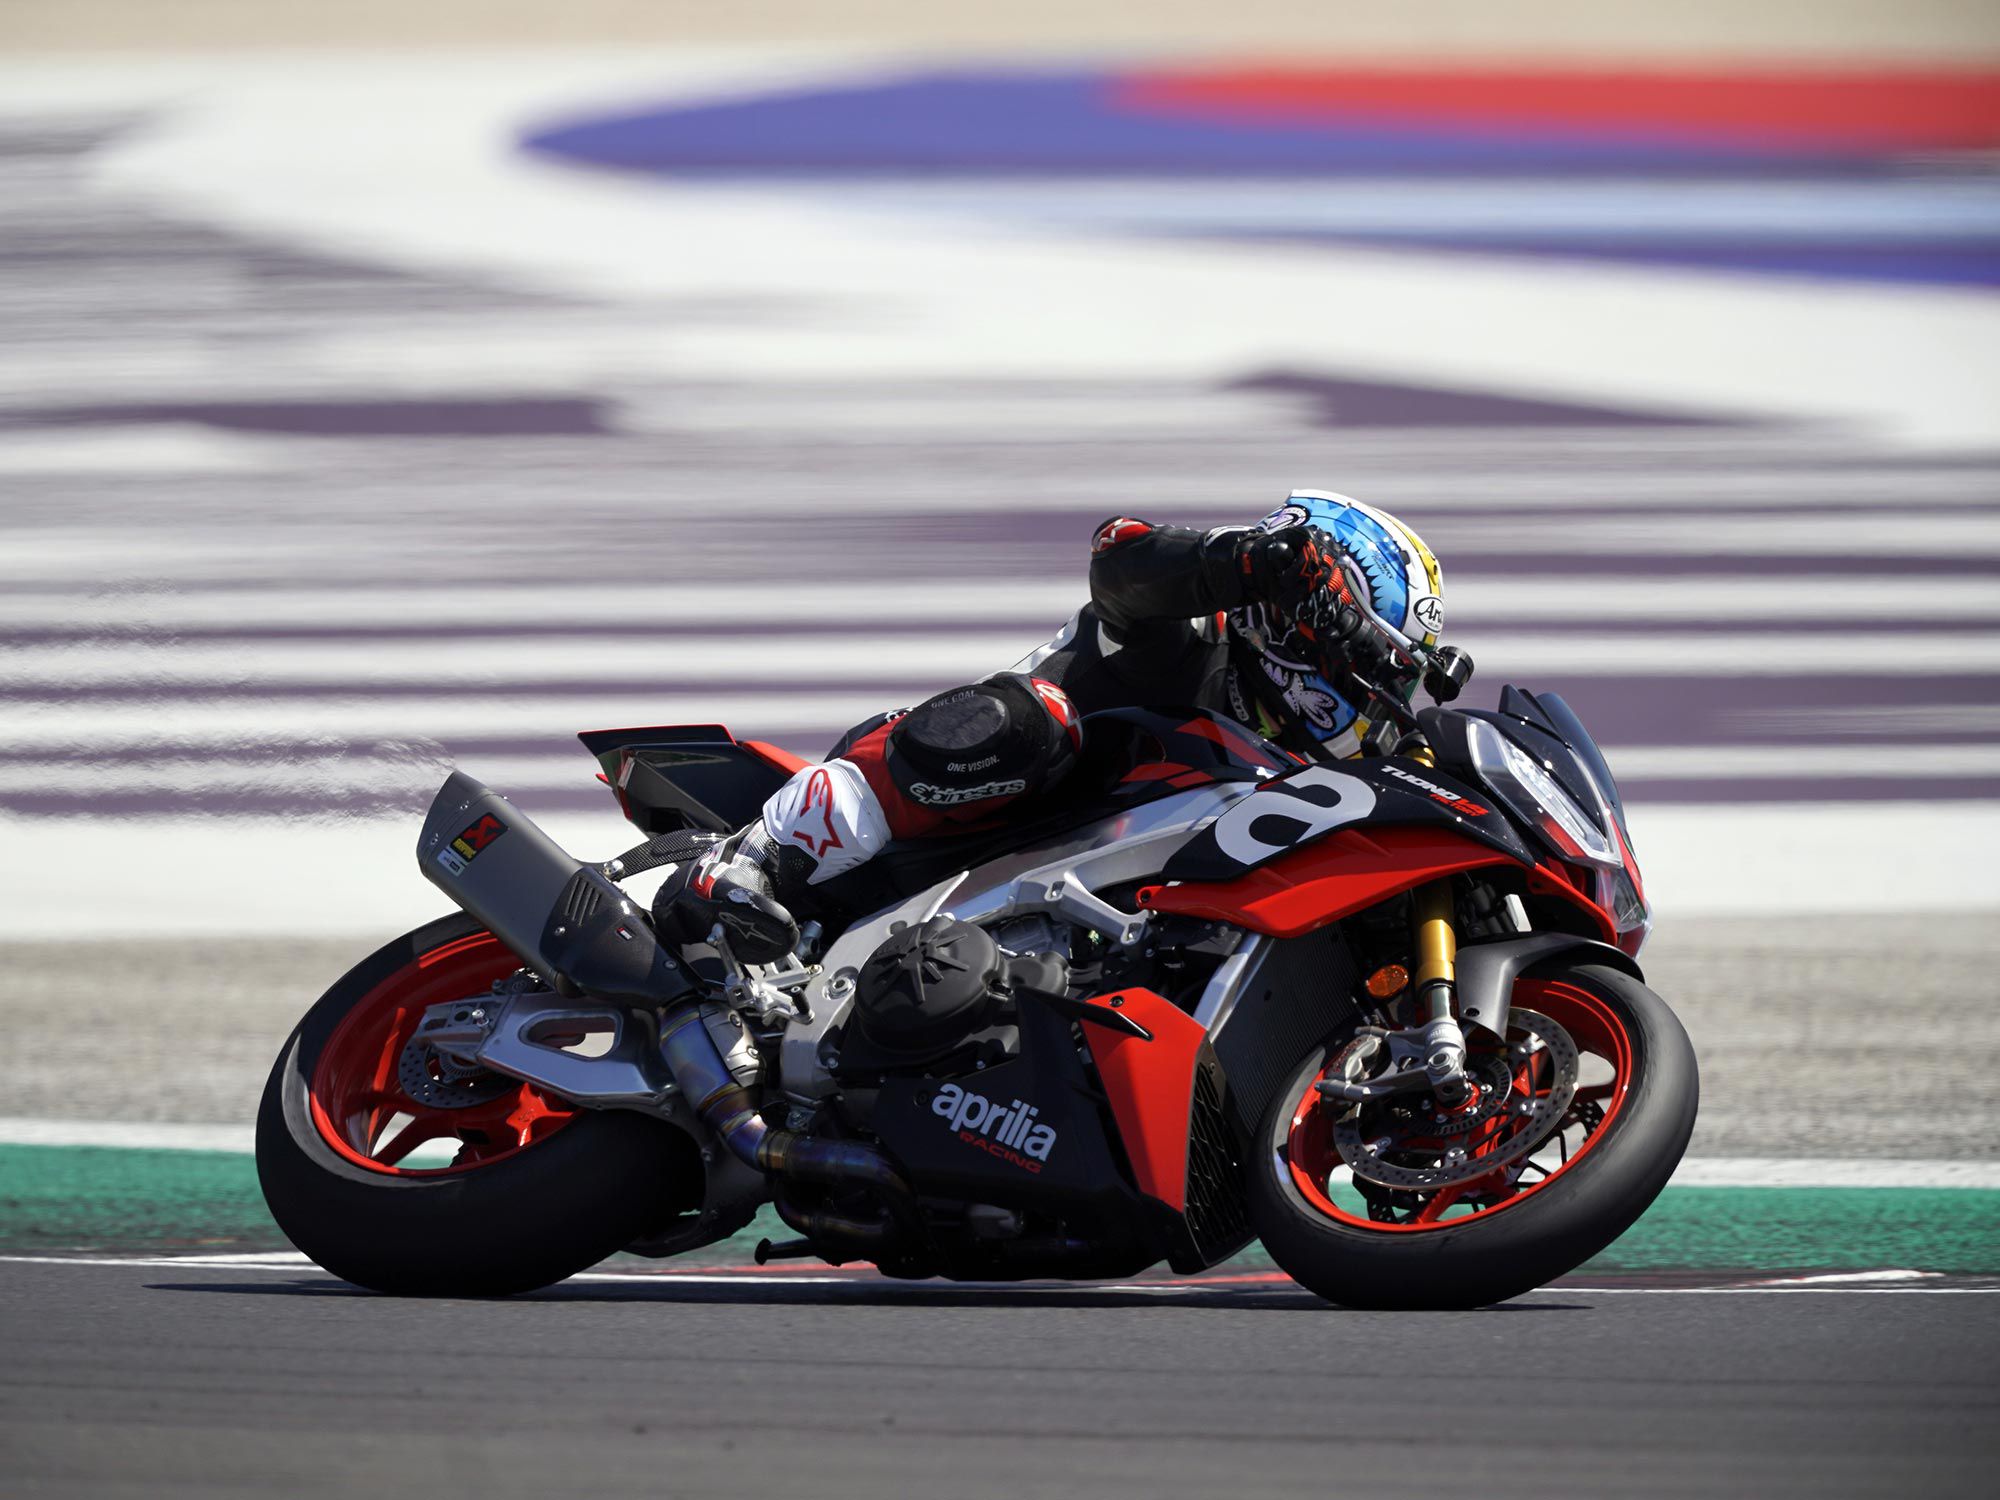 The familiarly narrow 65-degree V-4 has been tickled, which has increased the maximum rpm by 300, from 12,500 rpm to 12,800 rpm, and according to Aprilia this gains an extra 3.1 mph in top speed.